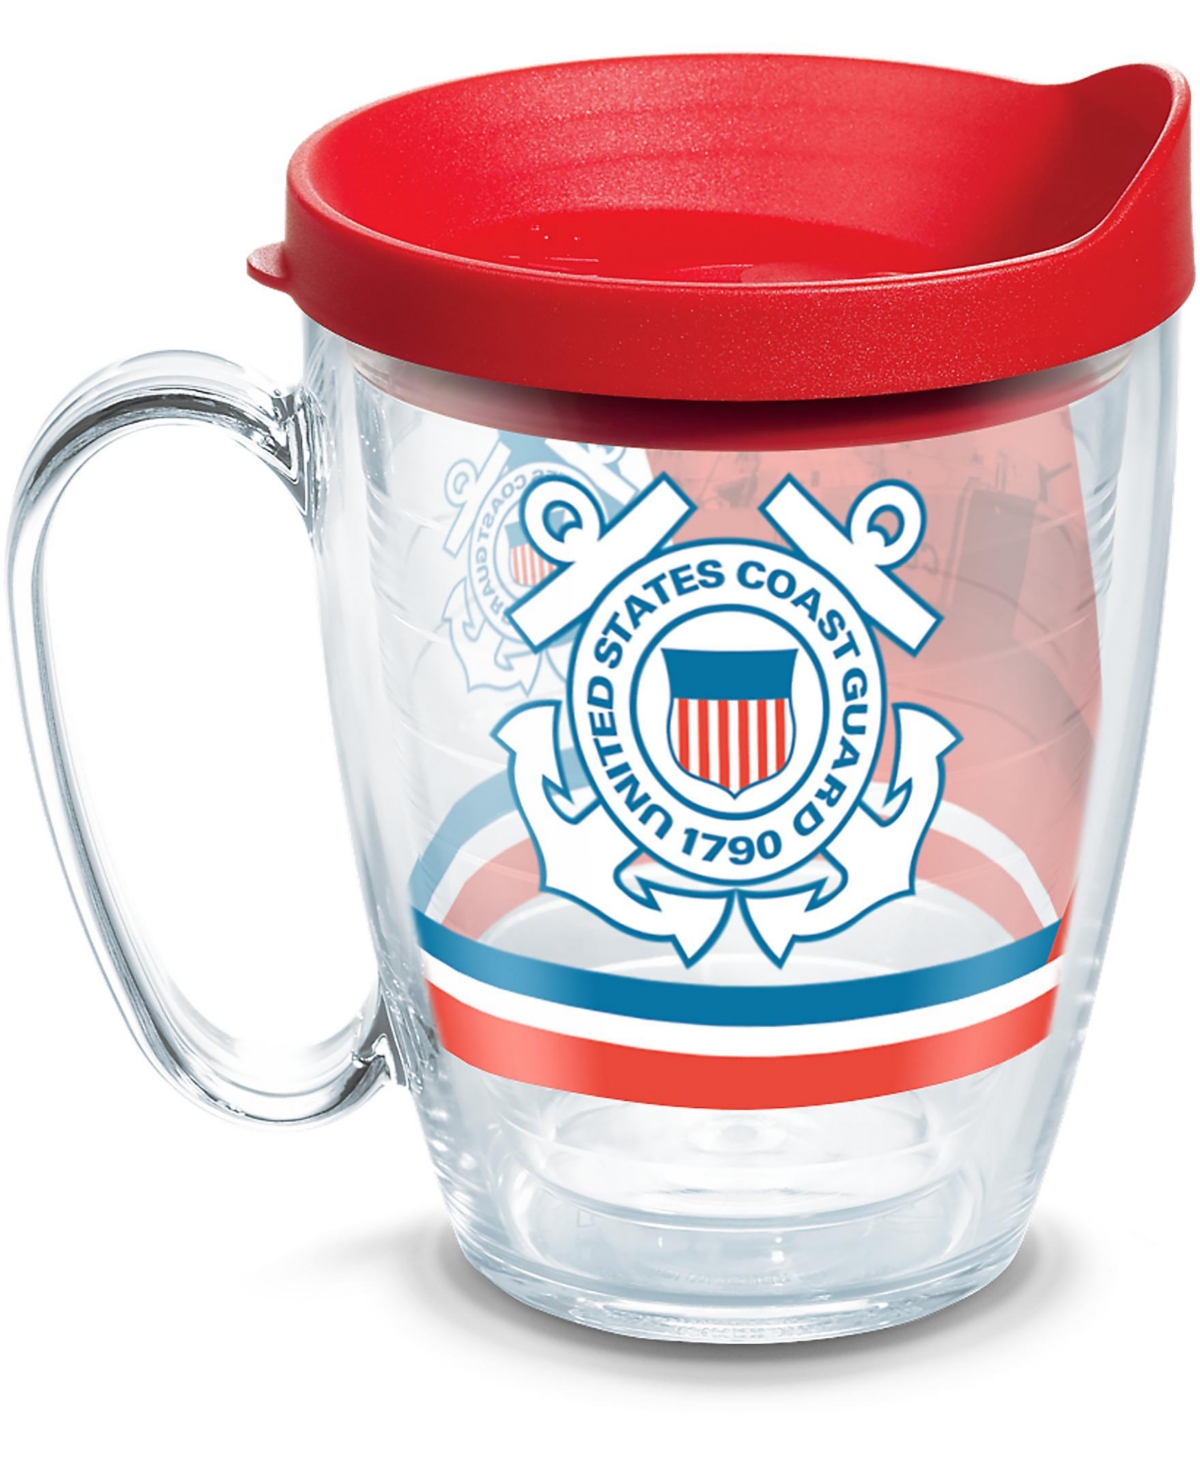 Tervis Tumbler Tervis Coast Guard Forever Proud Made In Usa Double Walled Insulated Tumbler Travel Cup Keeps Drinks In Open Miscellaneous